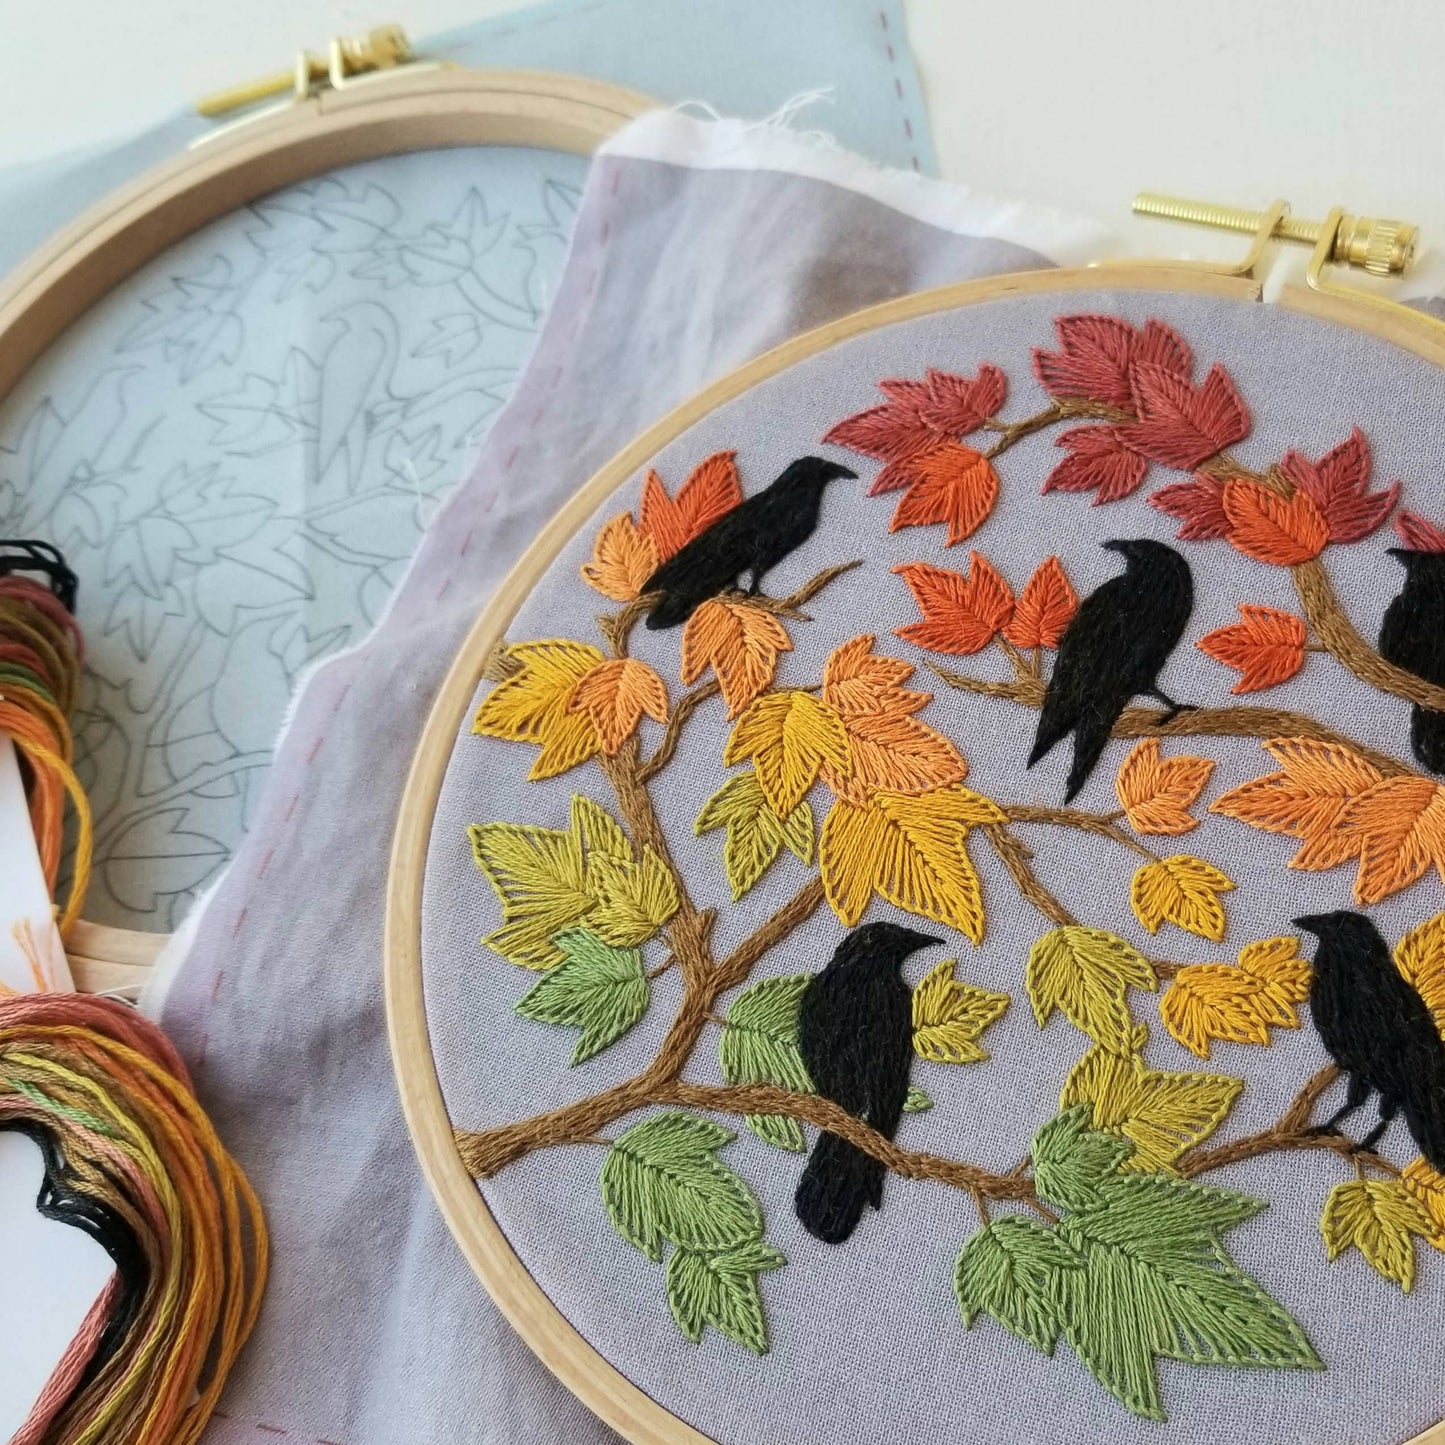 Autumn Birds Embroidery Kit | Jessica Long Embroidery